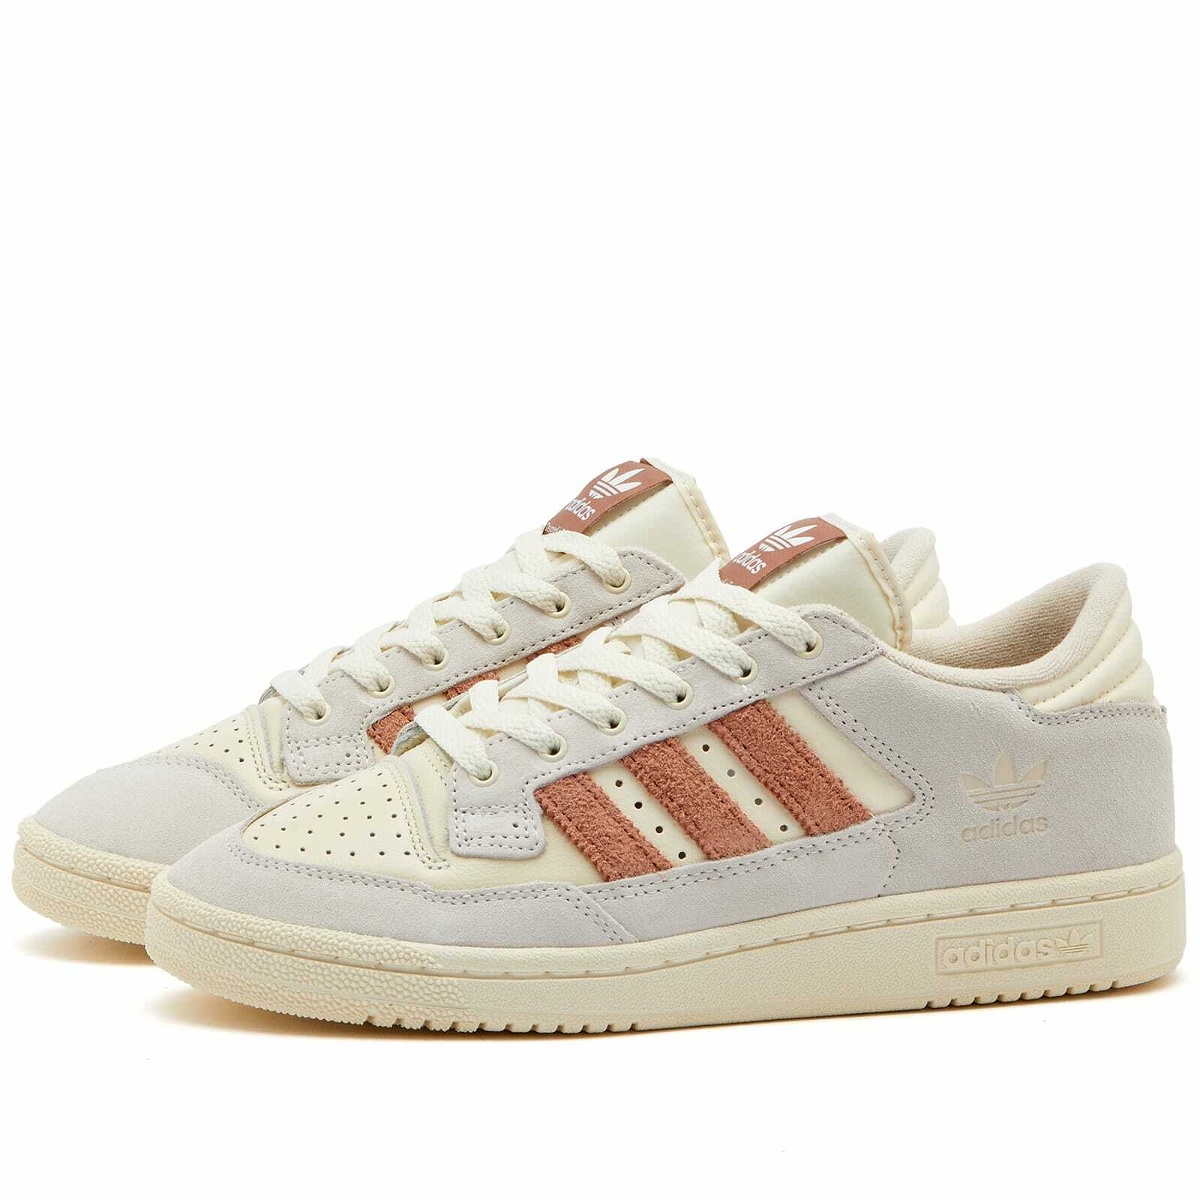 Adidas Women's Centennial 85 Lo W Sneakers in Halo Ivory/Clay Strata ...